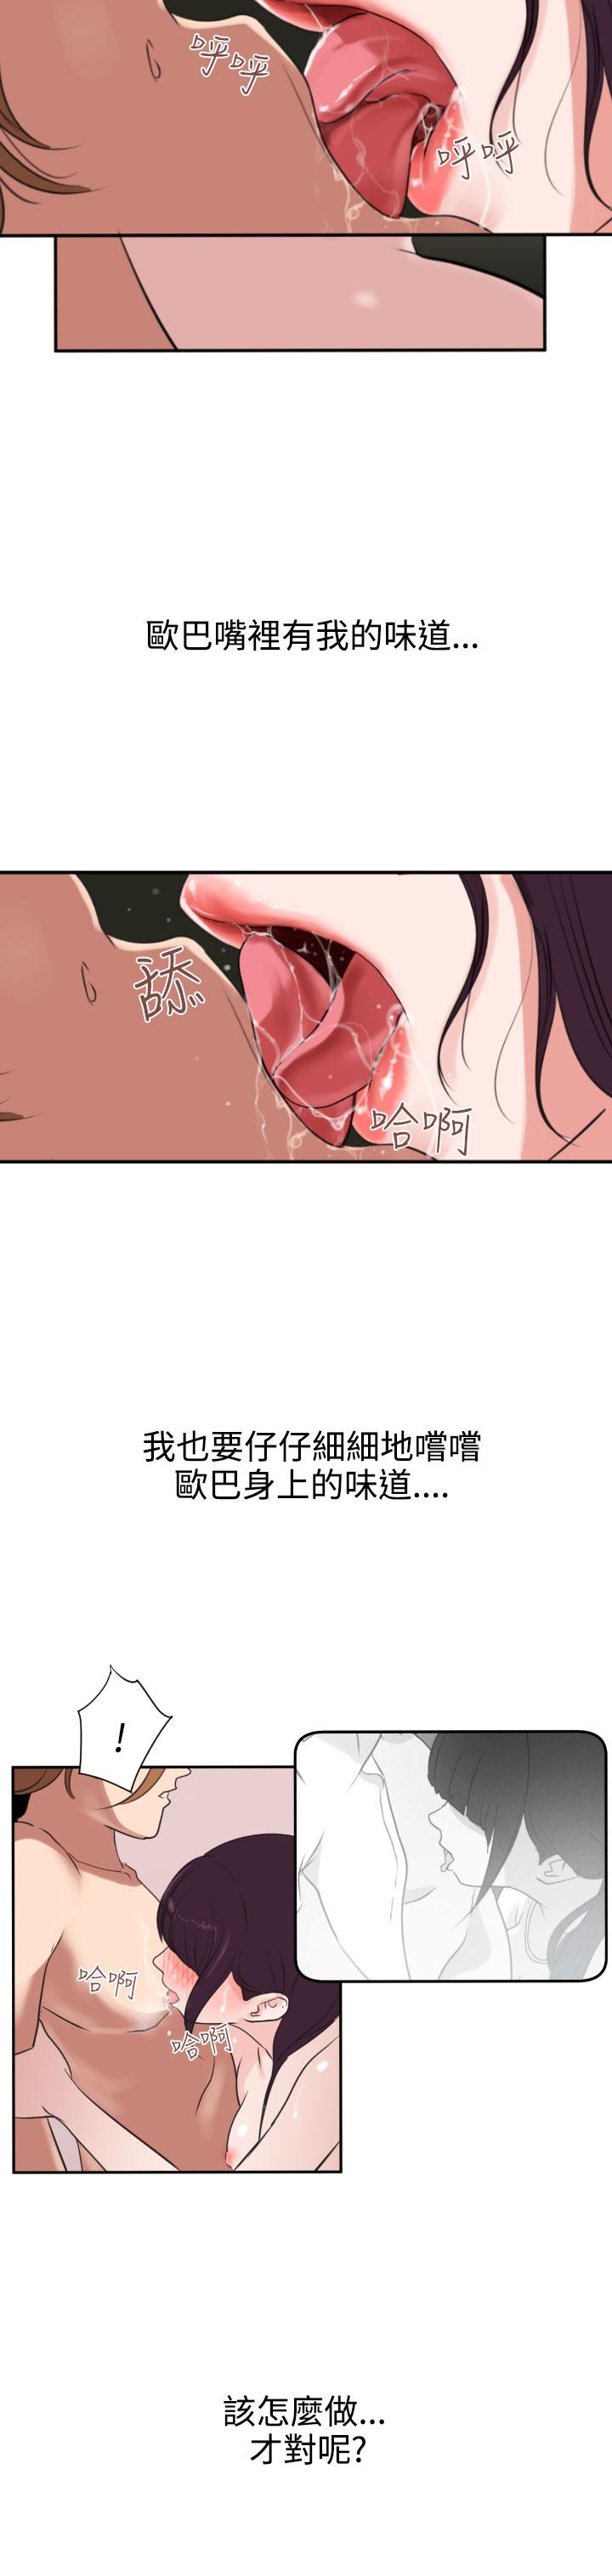 Desire King (慾求王) Ch.1-16 (chinese) 61